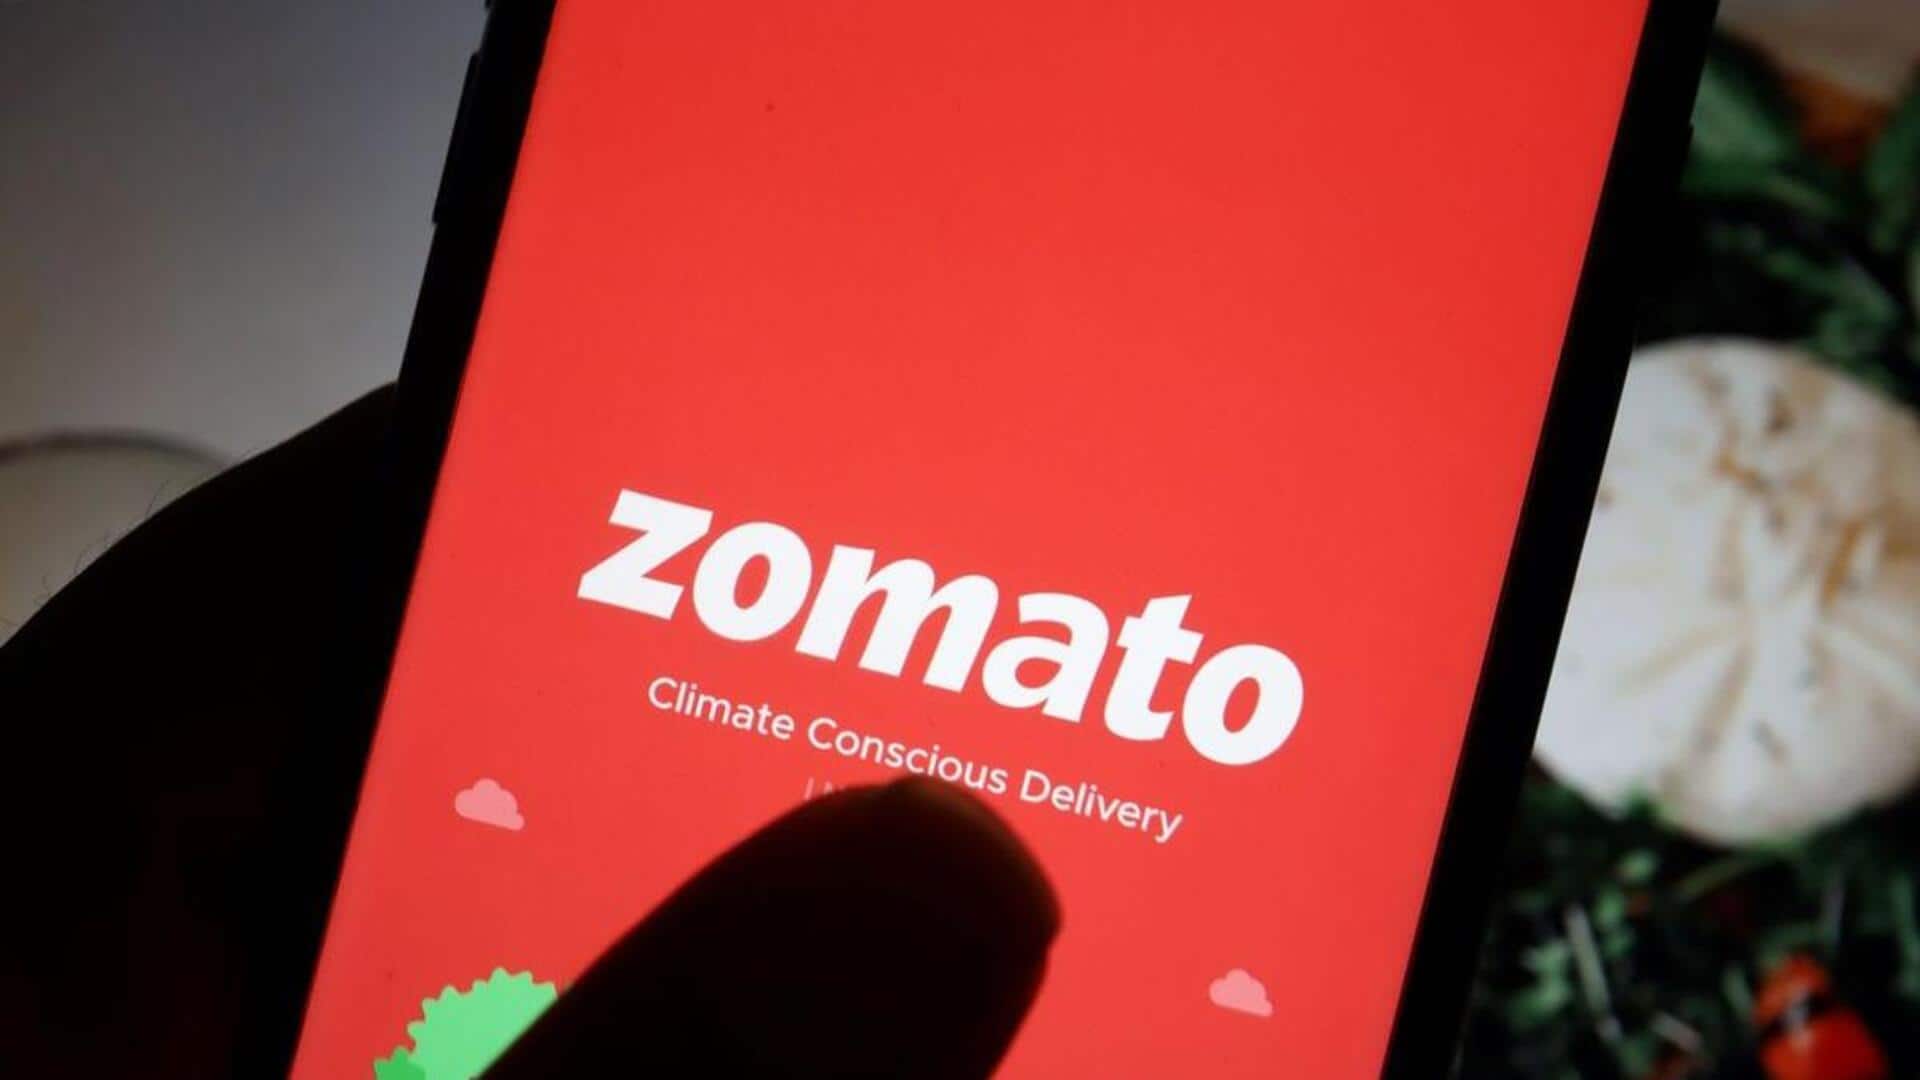 Zomato's Q3 profit surges over 280% to Rs. 138cr